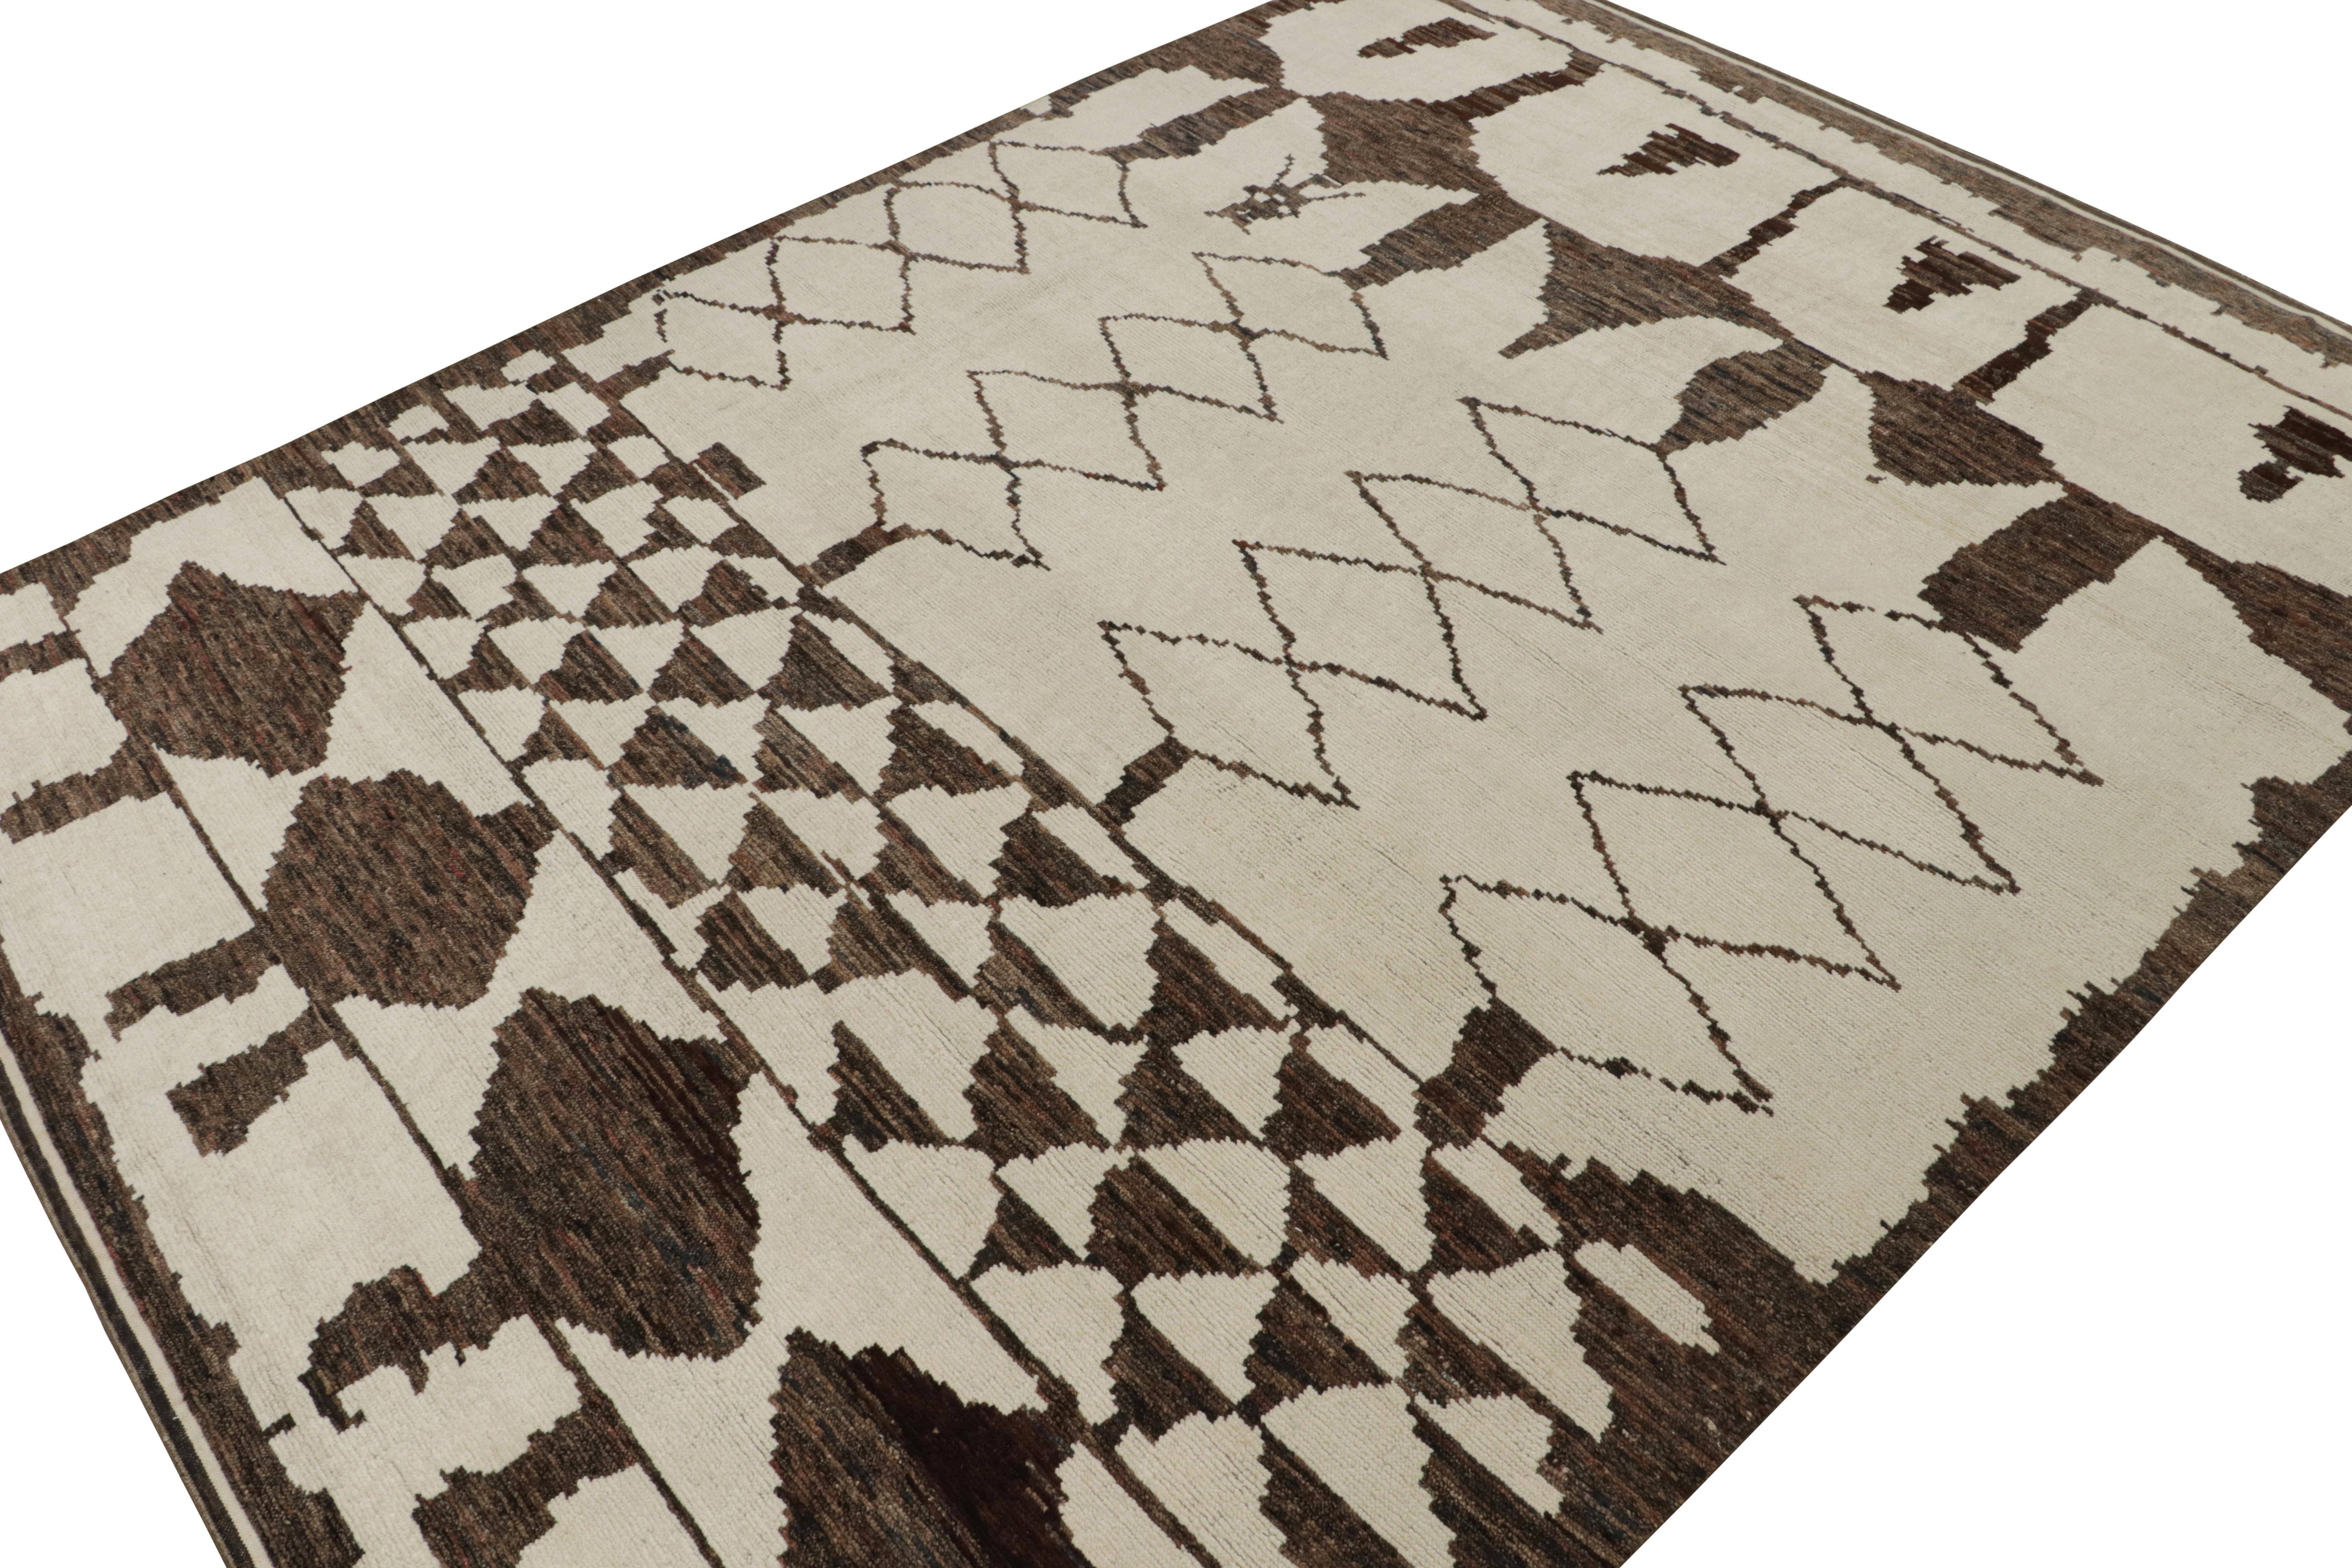 Hand-knotted in wool, this 12x15 rug is a new addition to the Moroccan Collection by Rug & Kilim. 

On the Design

This rug enjoys a cream and beige undertone with chocolate brown lozenges and other geometric patterns of primitivist style.